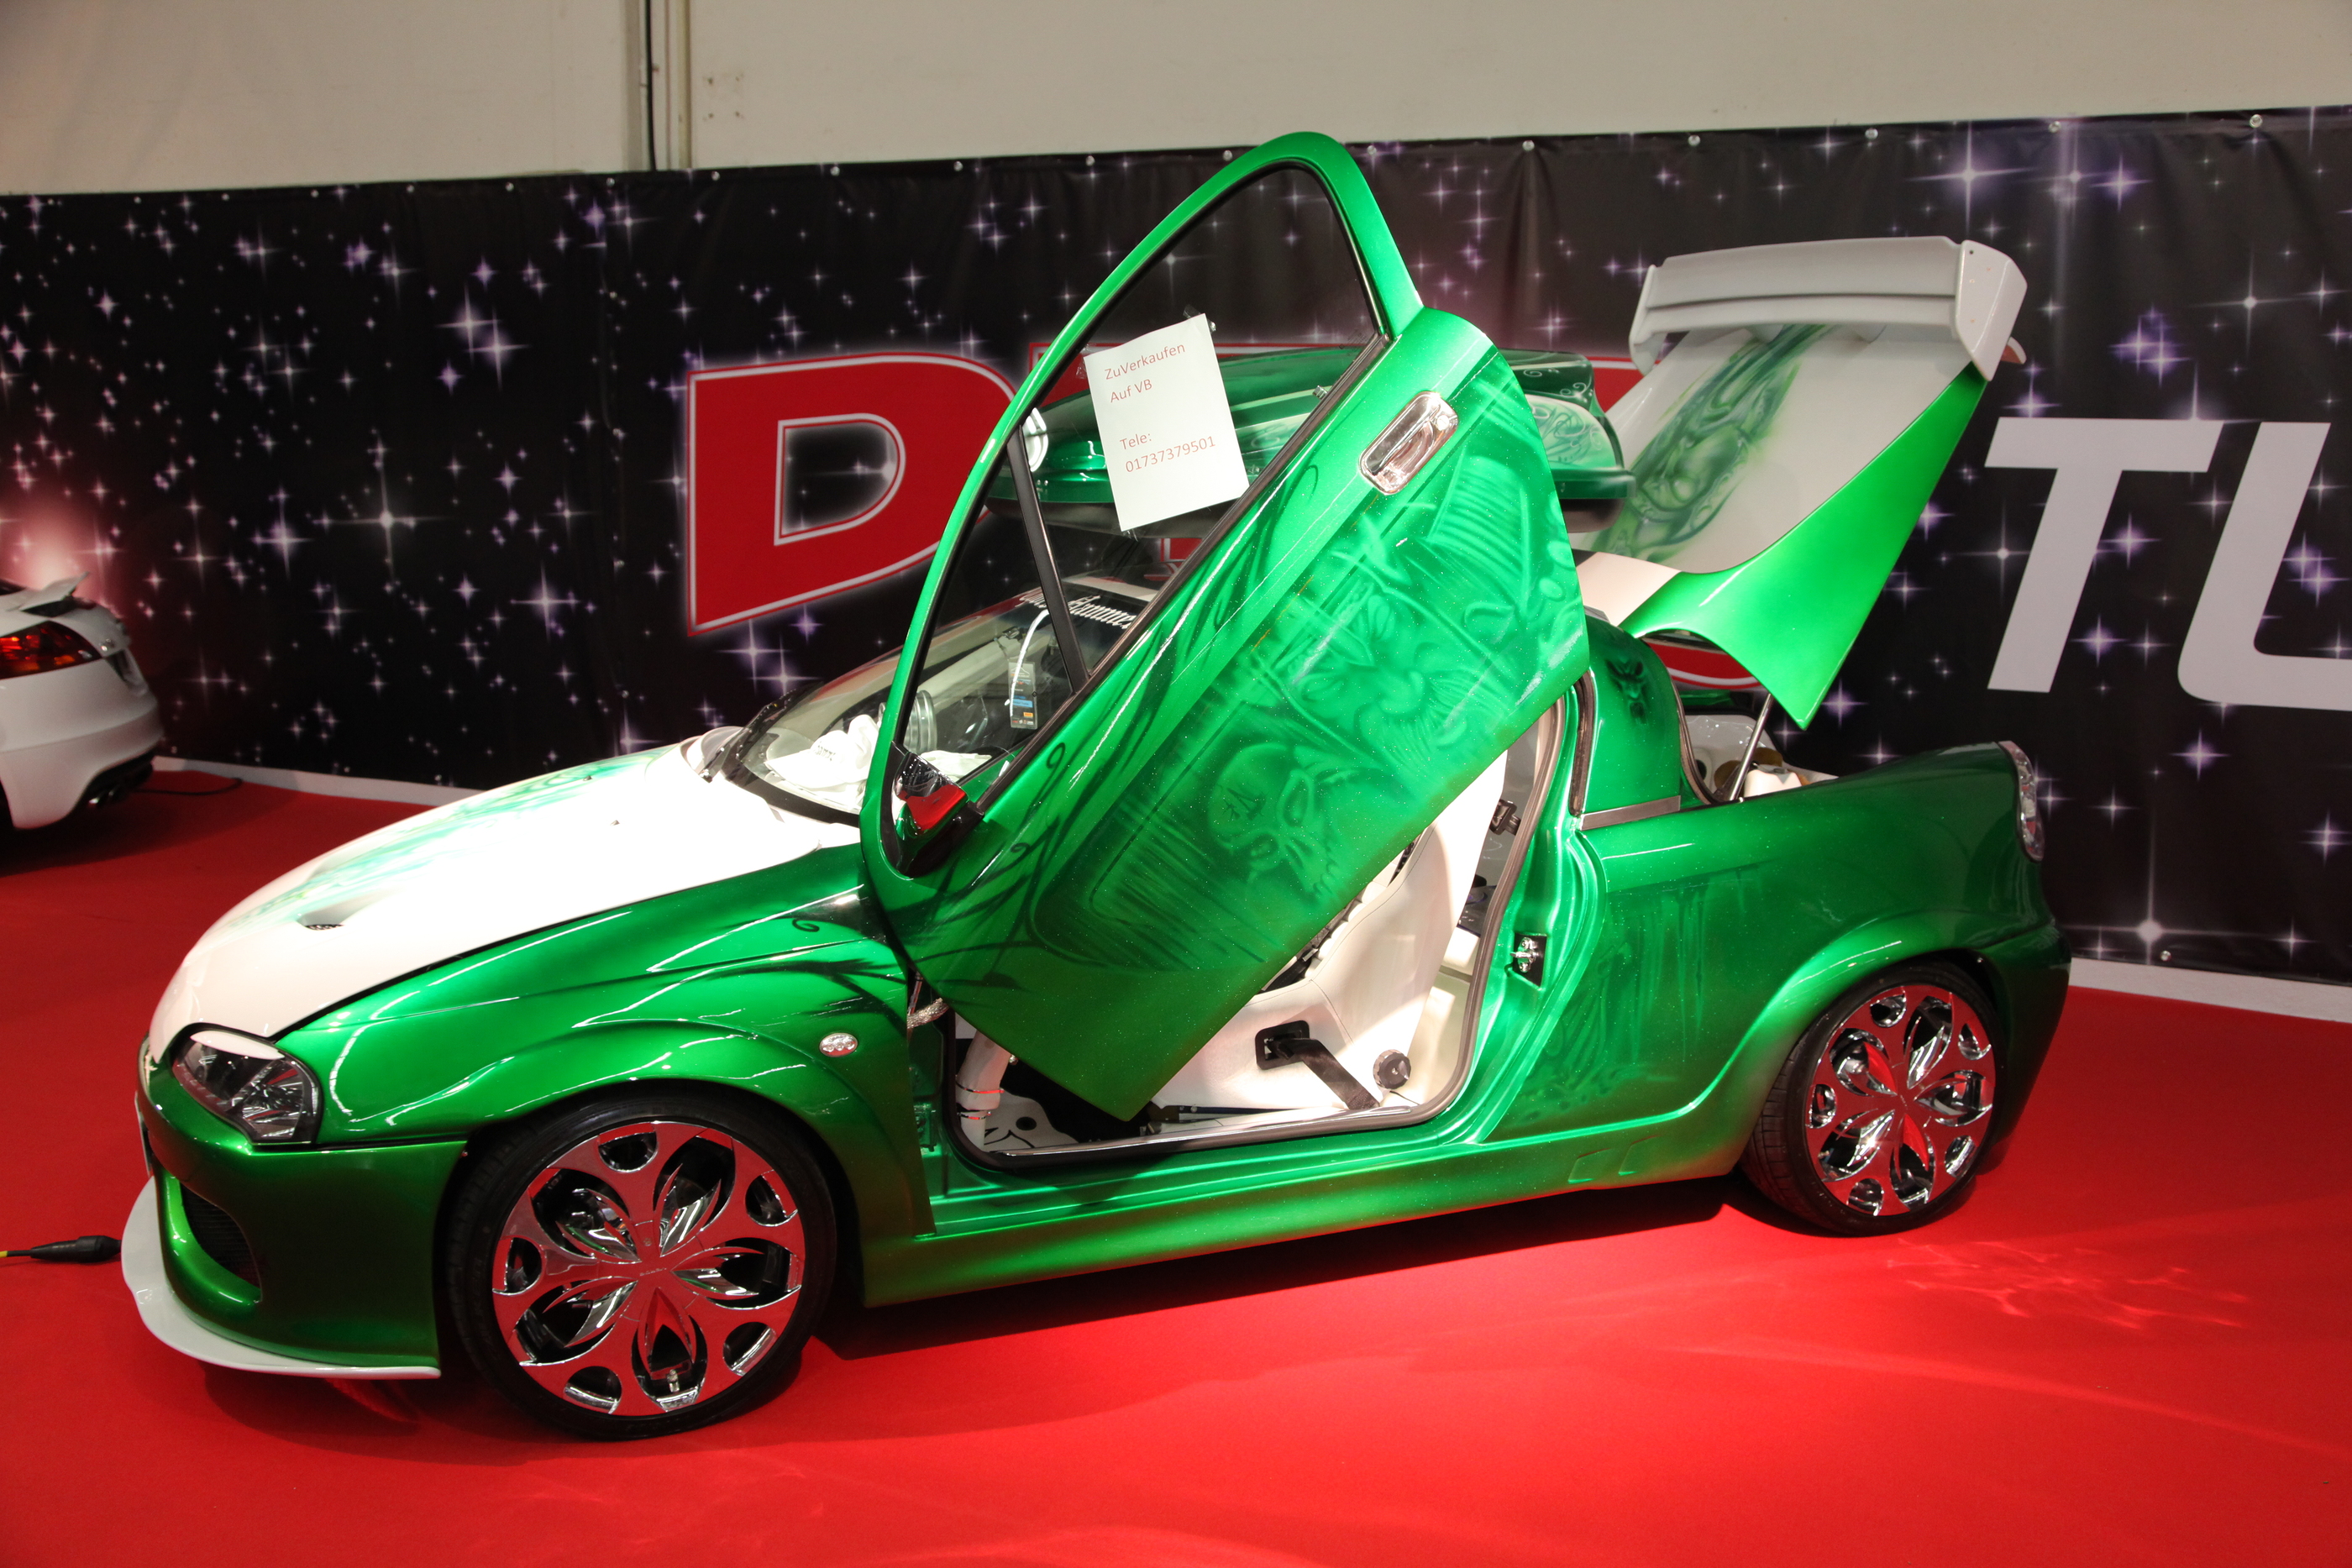 ESSEN, GERMANY - NOV 29: OPEL TIGRA WITH GULL-WING DOORS FROM DTS TUNINGSTAR SHOWN AT THE ESSEN MOTO BY P.LANGE